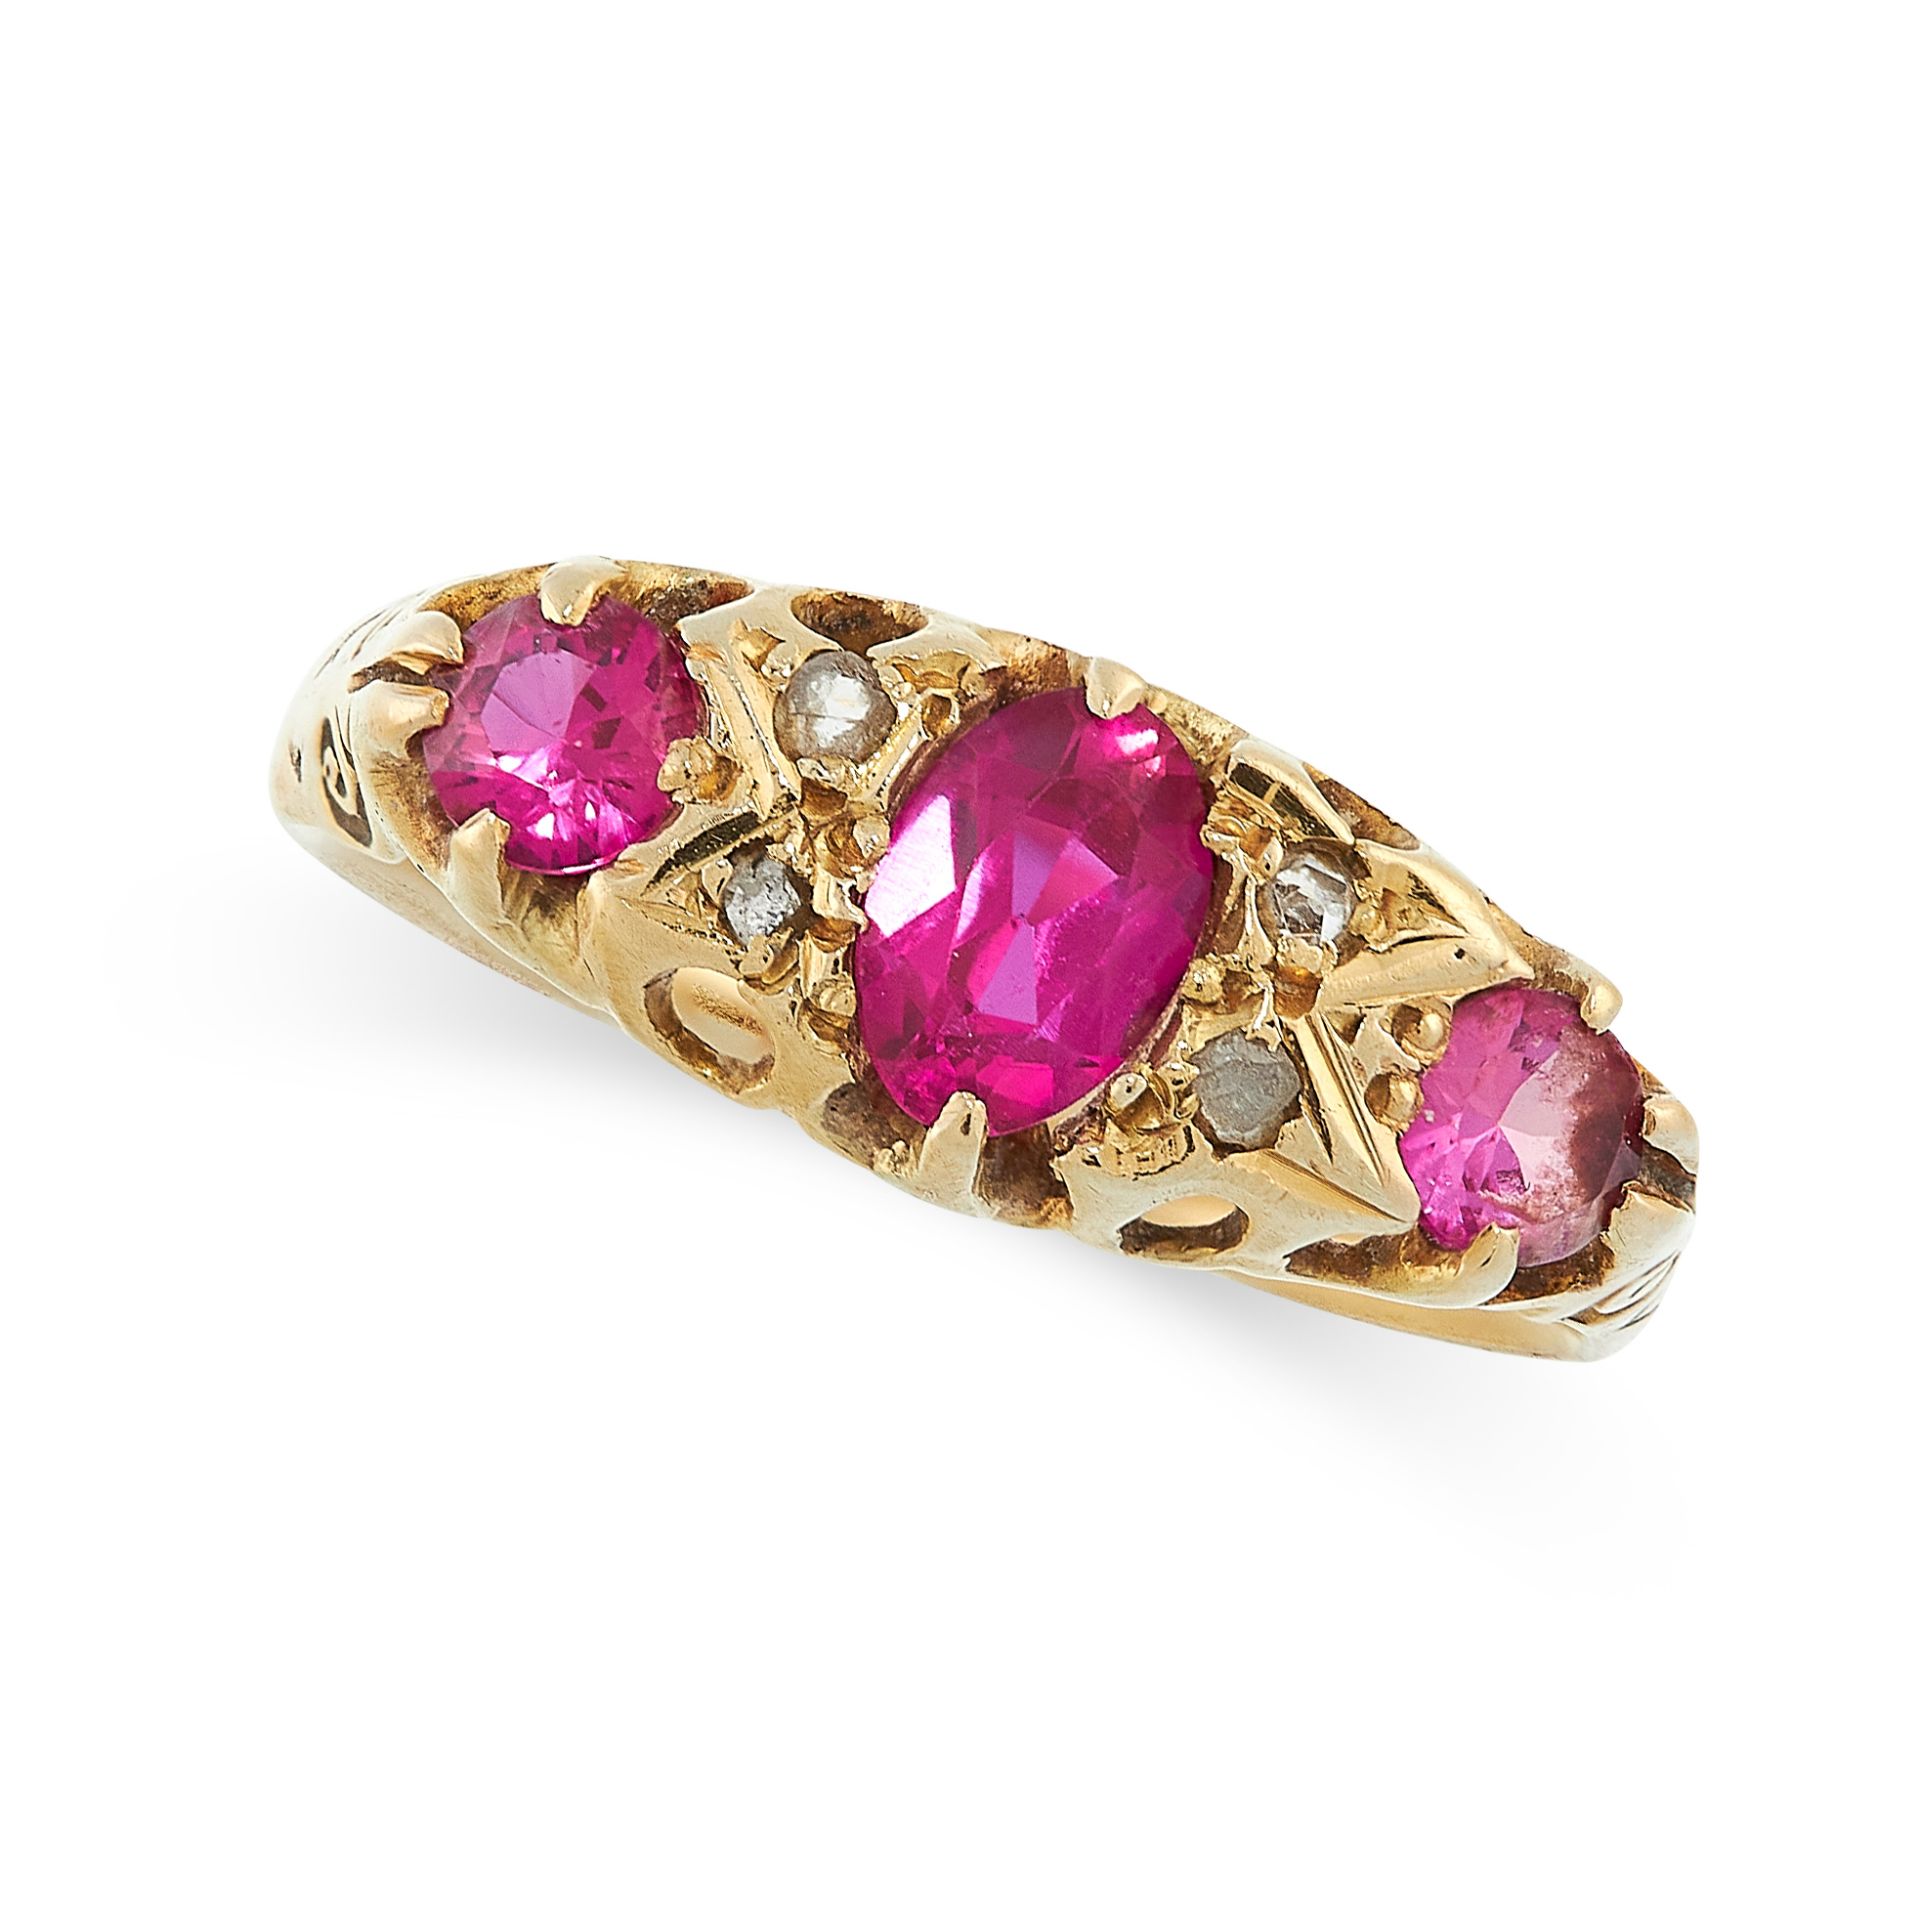 ANTIQUE SYNTHETIC RUBY AND DIAMOND RING, EARLY 20TH CENTURY in yellow gold, set with one oval and